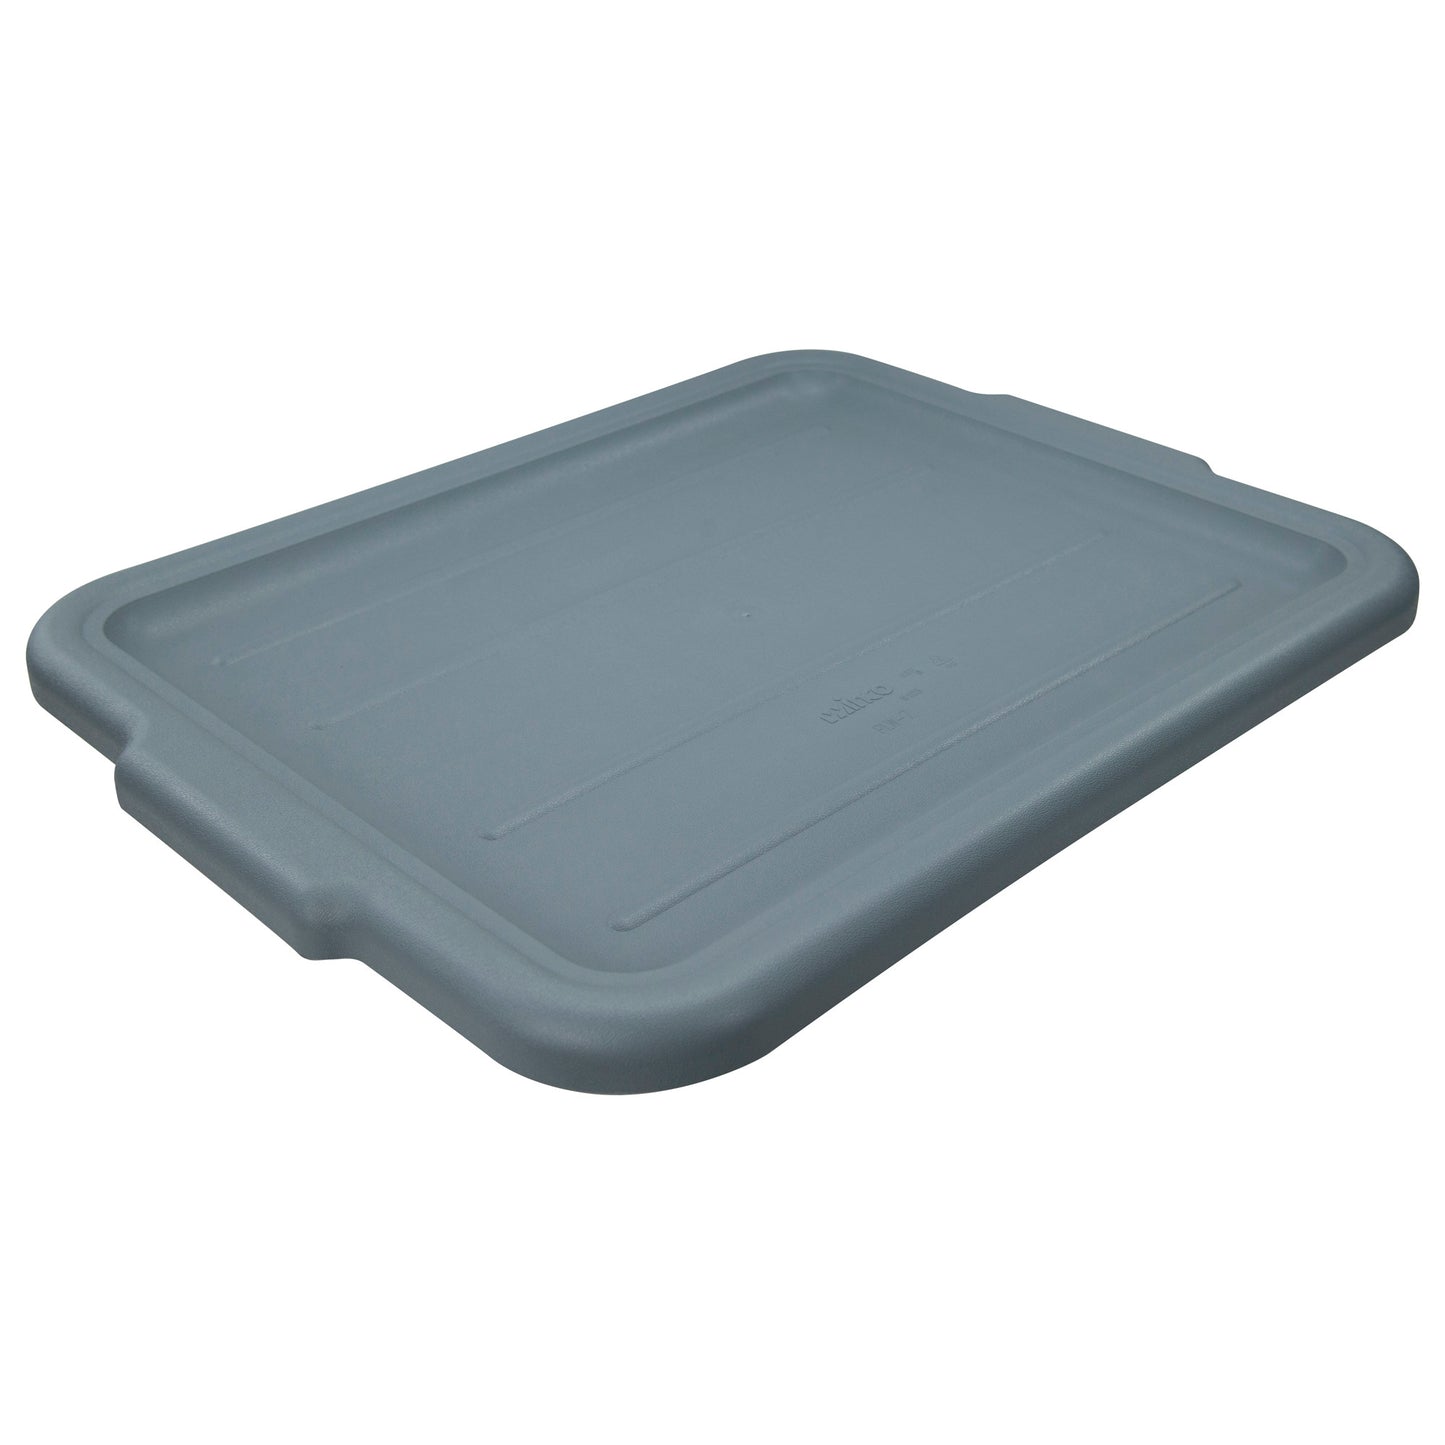 PLW-CG - Cover for PLW-7 Series Dish Boxes - Gray